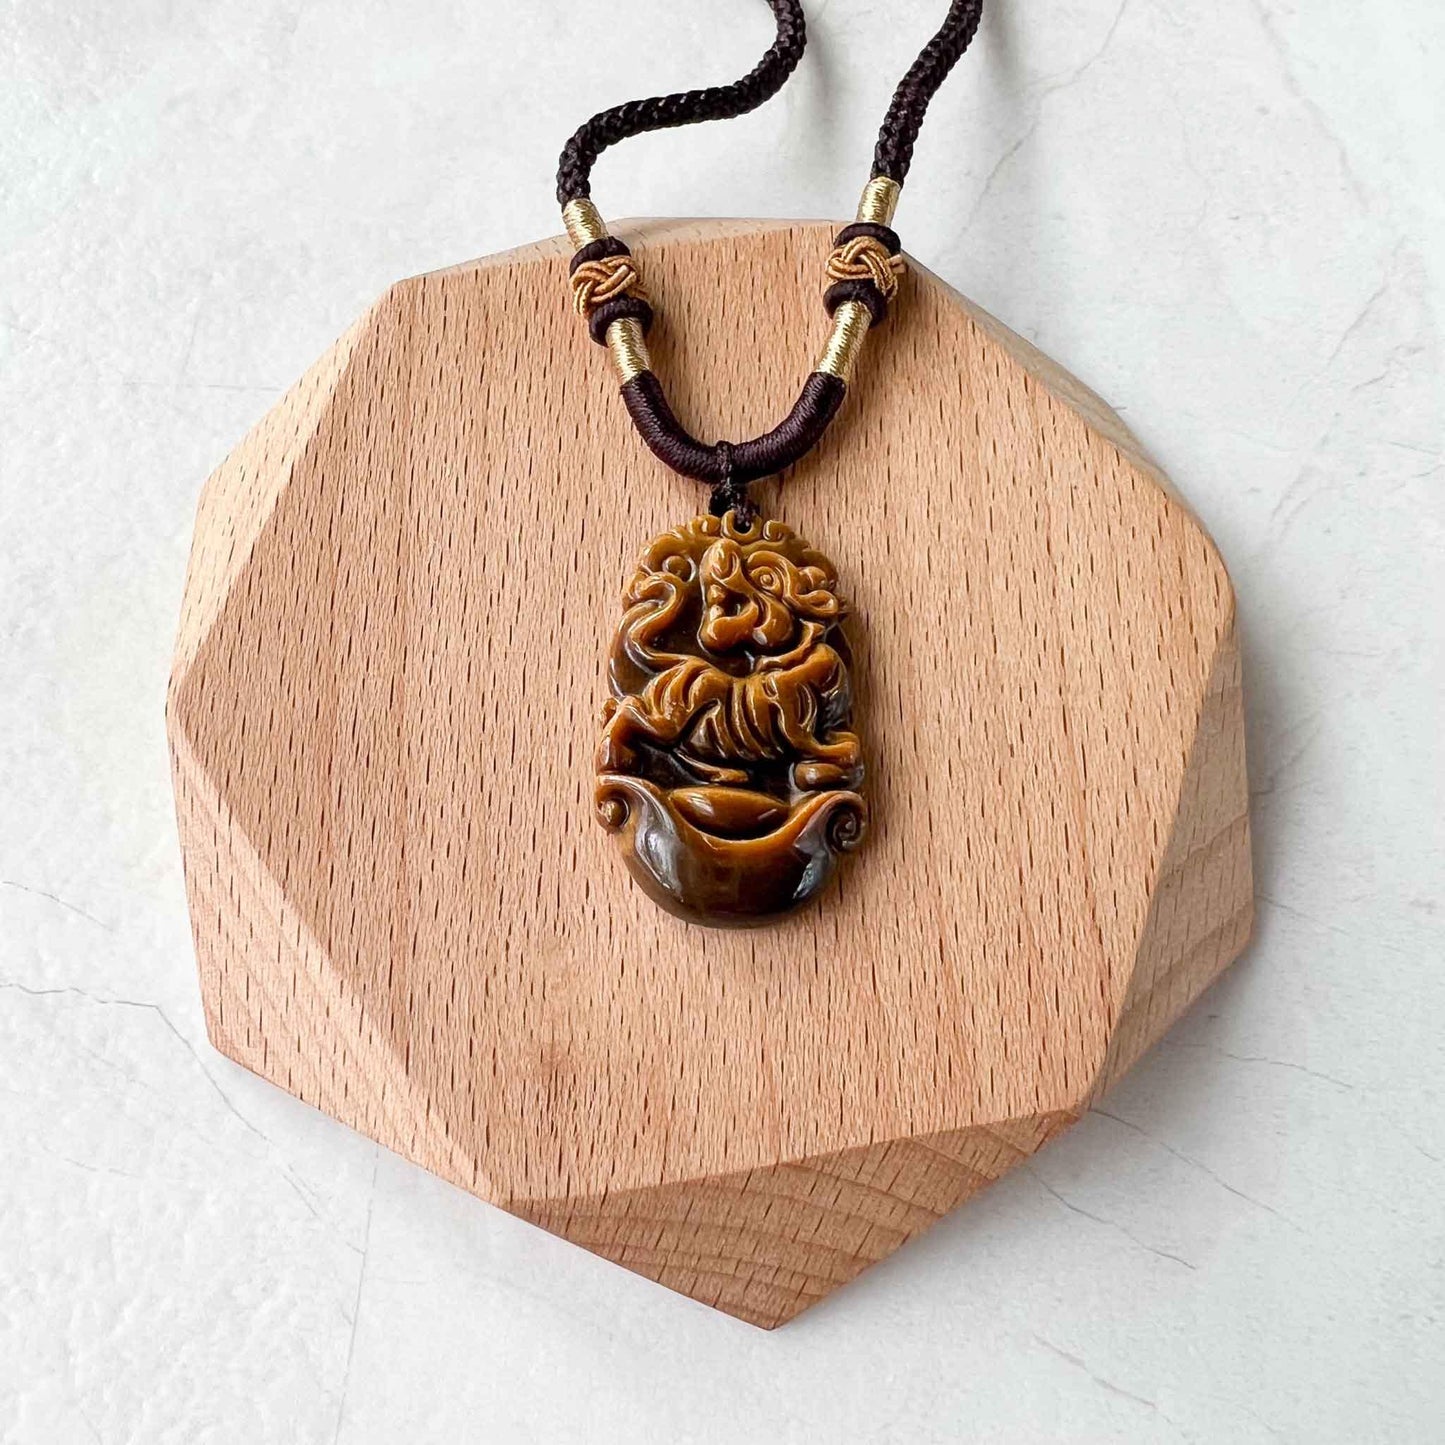 Tiger Eye Tiger Chinese Zodiac Carved Pendant Necklace, YW-0110-1685929076